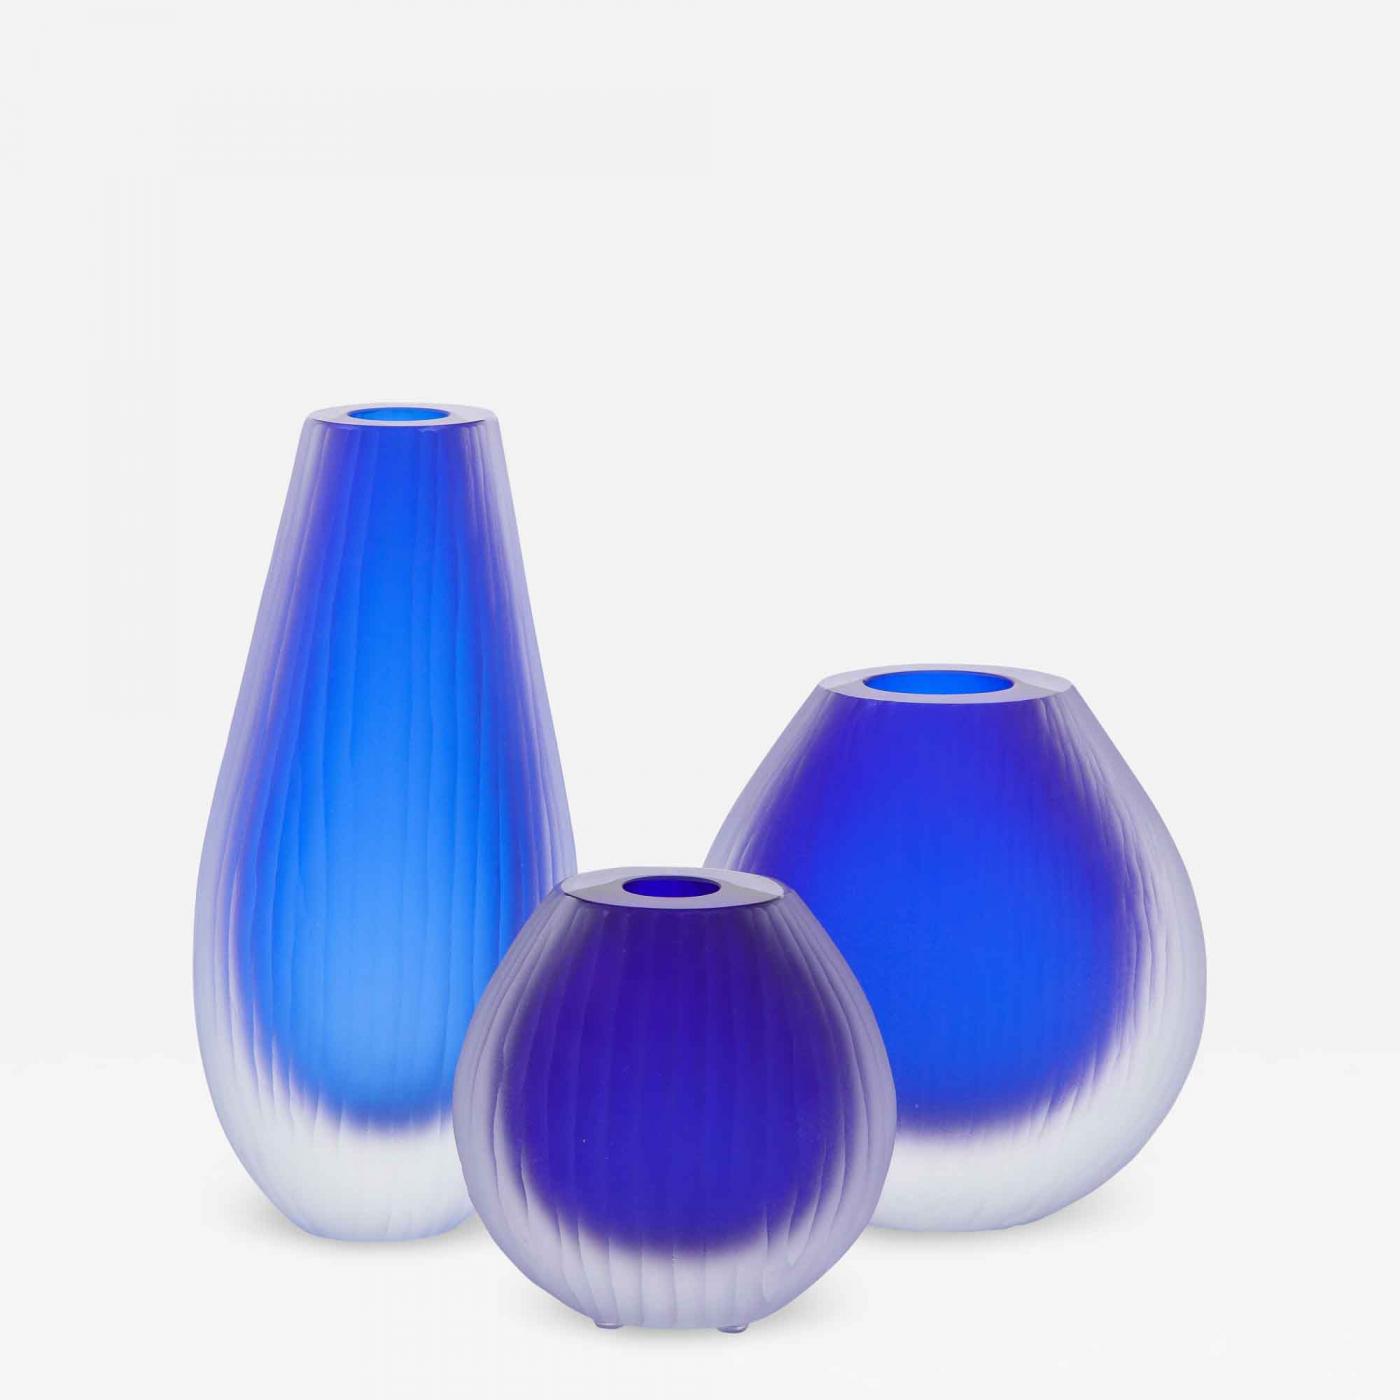 https://cdn.incollect.com/sites/default/files/zoom/Alberto-Dona-Set-of-Three-Fluted-Cobalt-Blue-Murano-Glass-Vases-Signed-by-Alberto-Don-433211-1803039.jpg